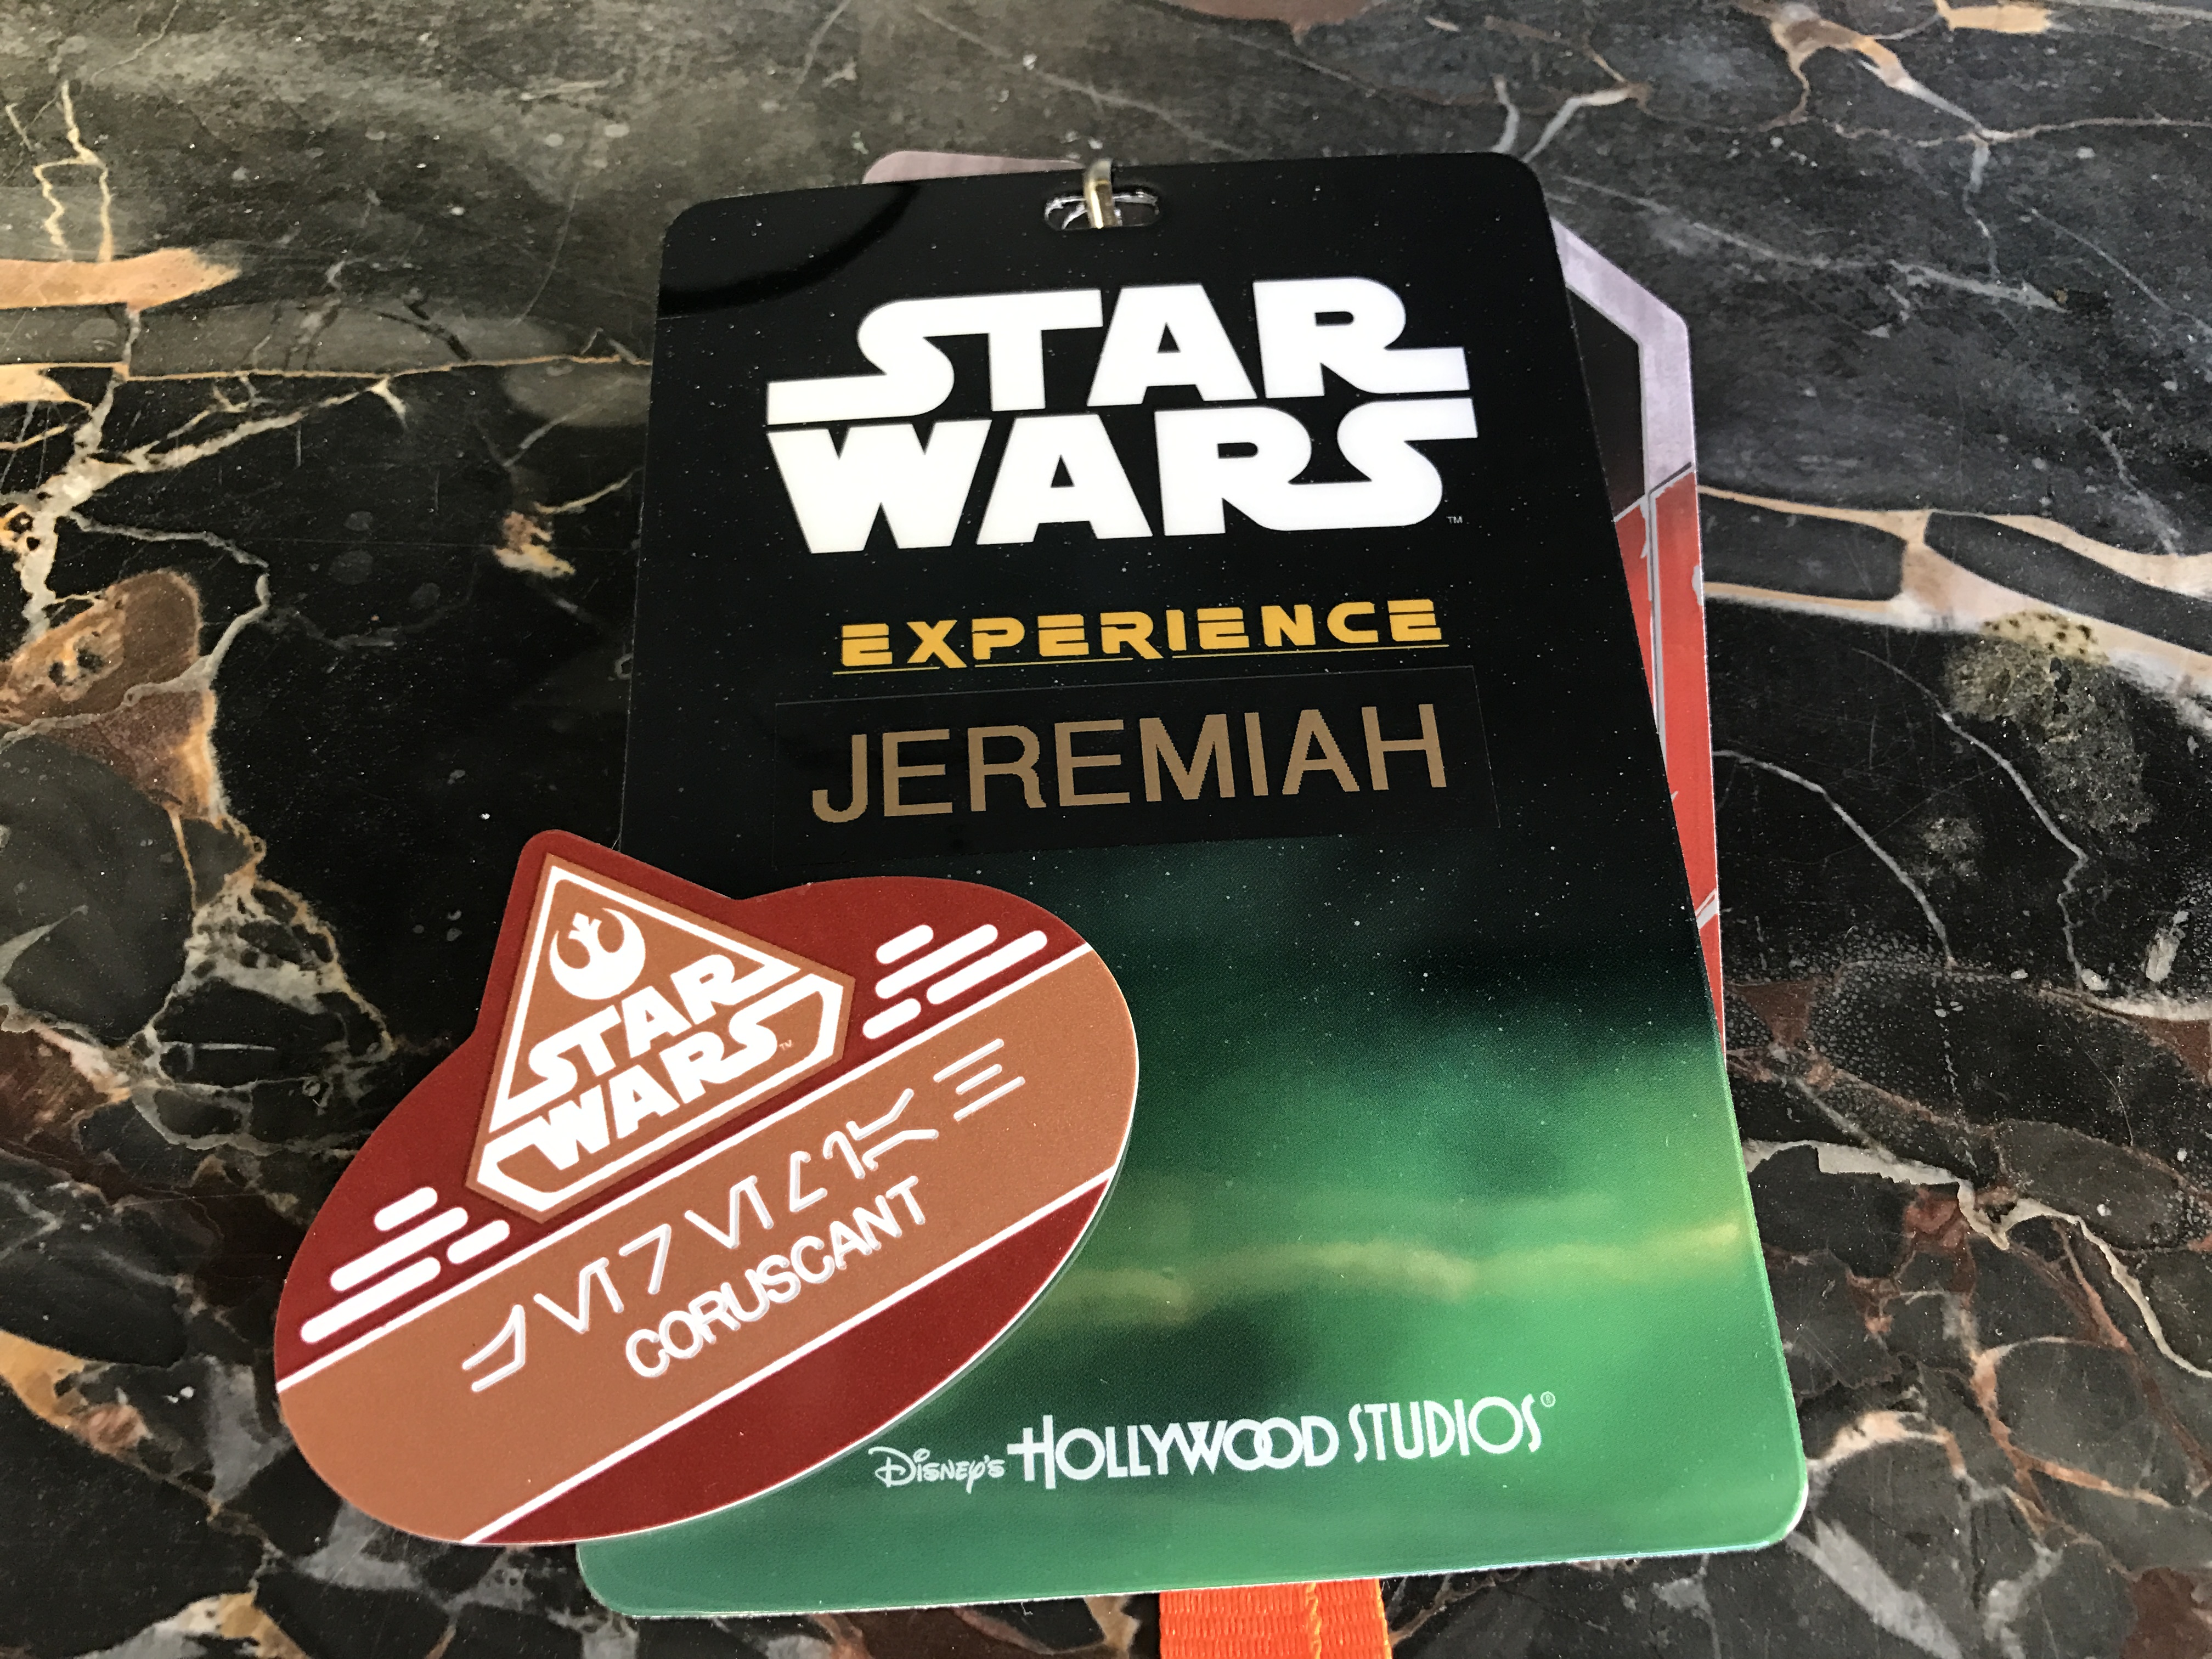 Star Wars Guided Tour - Recap and Review